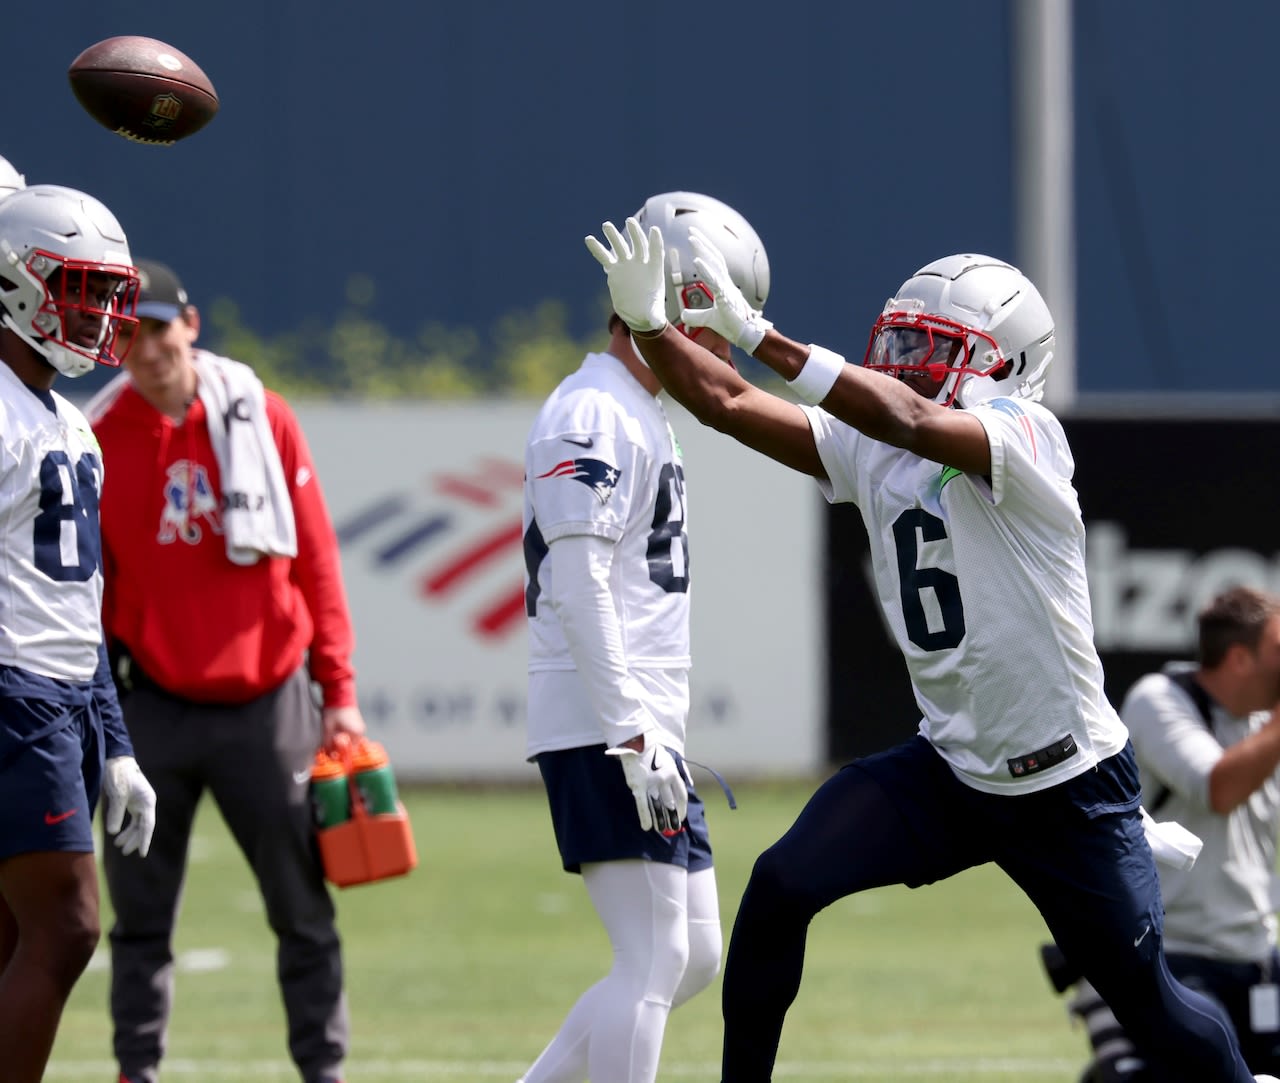 Patriots rookie receiver shines with multiple highlights in OTAs